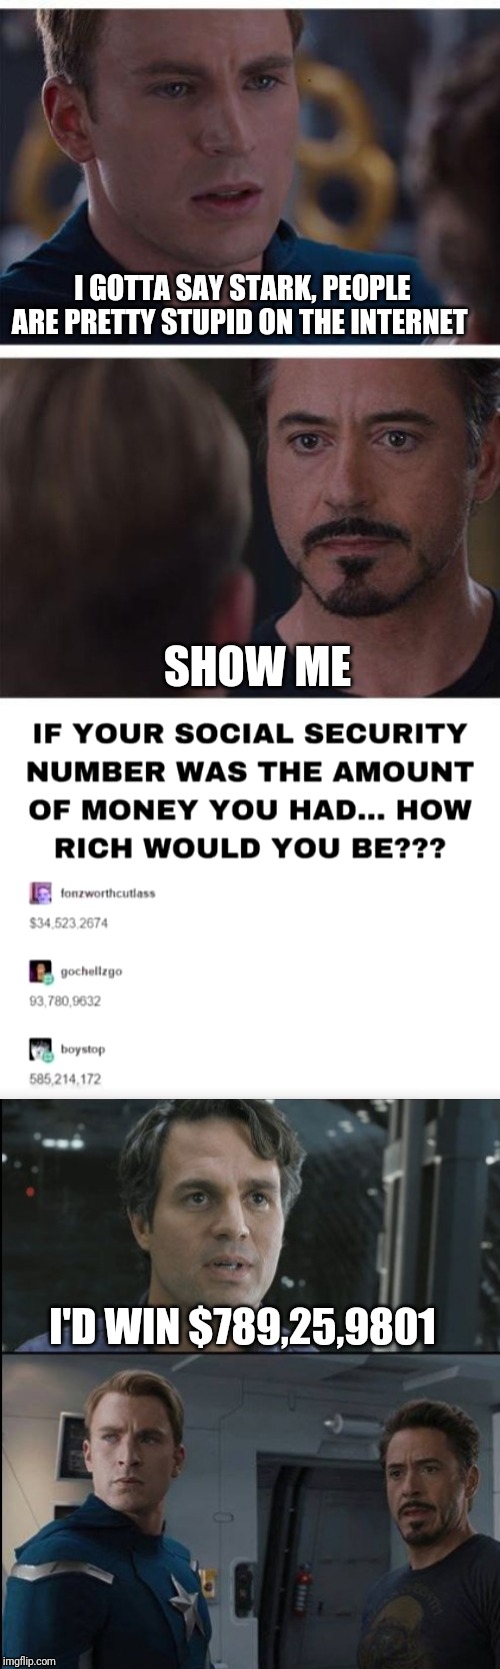 Stark and The Internet | I GOTTA SAY STARK, PEOPLE ARE PRETTY STUPID ON THE INTERNET; SHOW ME; I'D WIN $789,25,9801 | image tagged in marvel civil war 1,hulk,internet | made w/ Imgflip meme maker